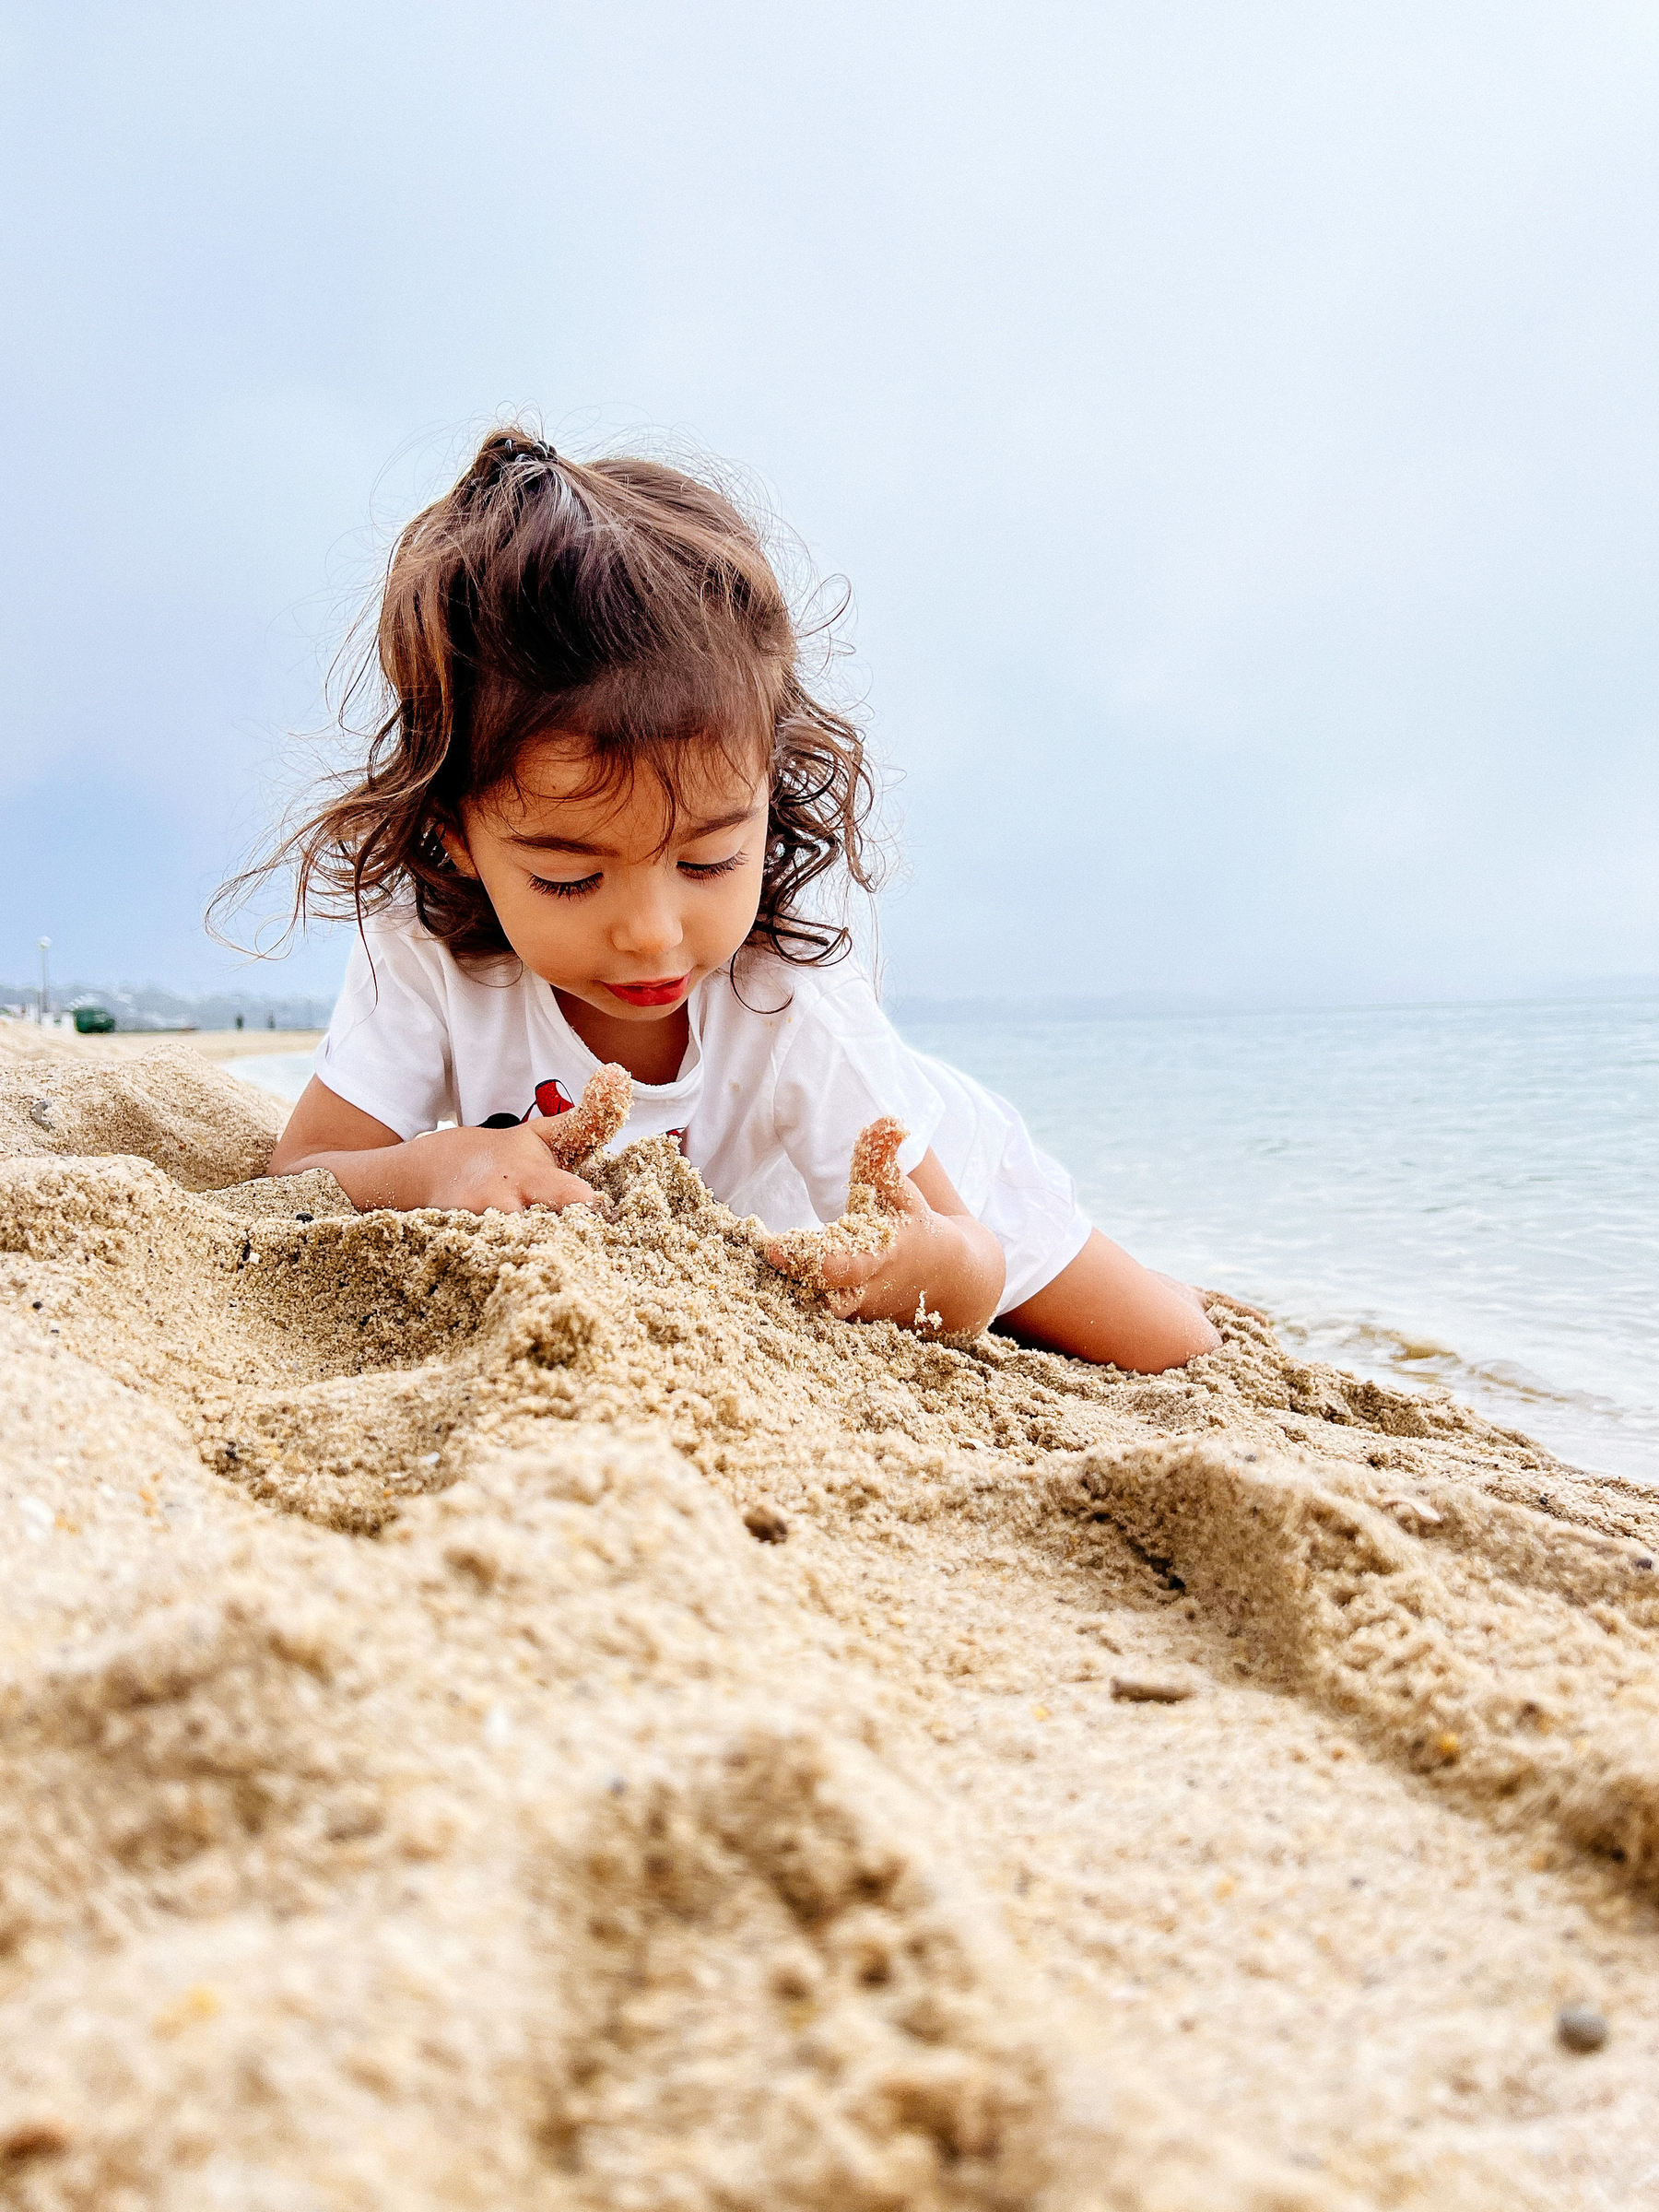 Toddler by the sea, playing with sand